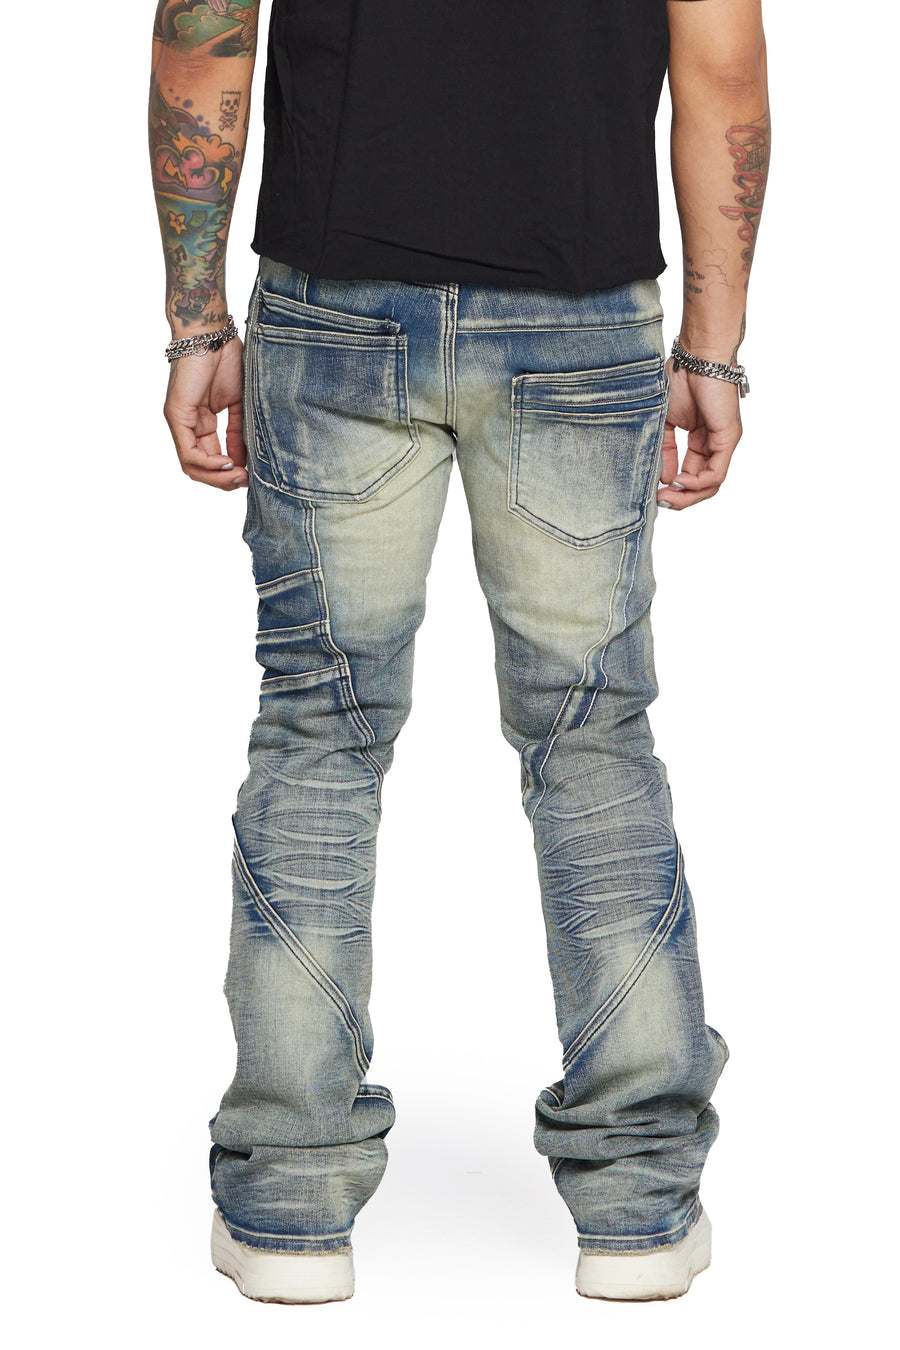 “WOLF” VINTAGE WASH STACKED FLARE JEAN